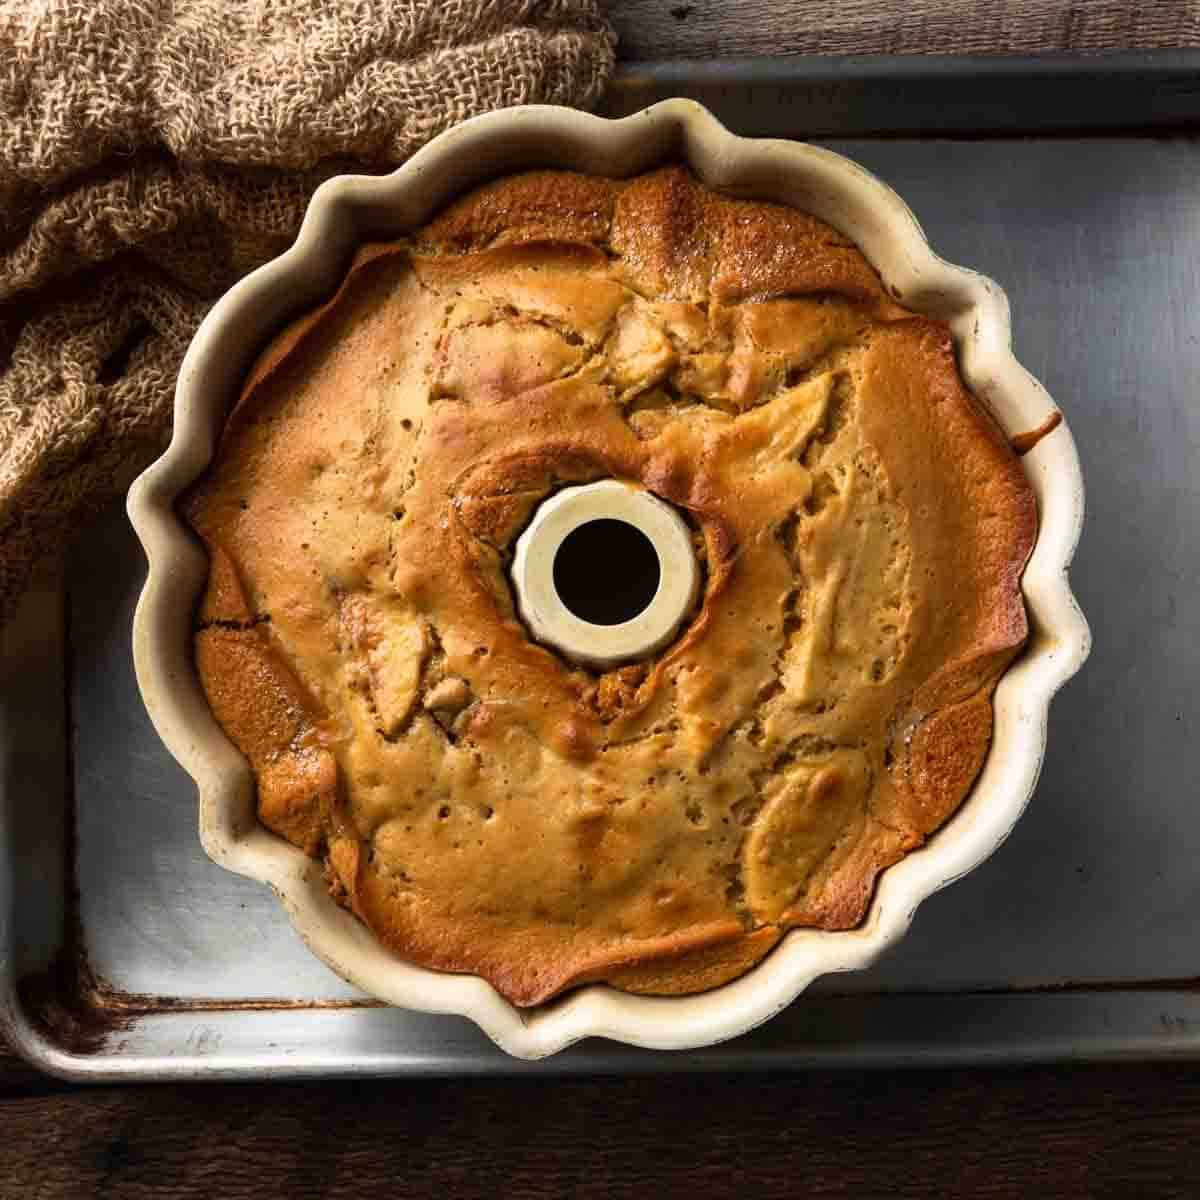 The freshly baked Jewish apple cake in the bundt pan